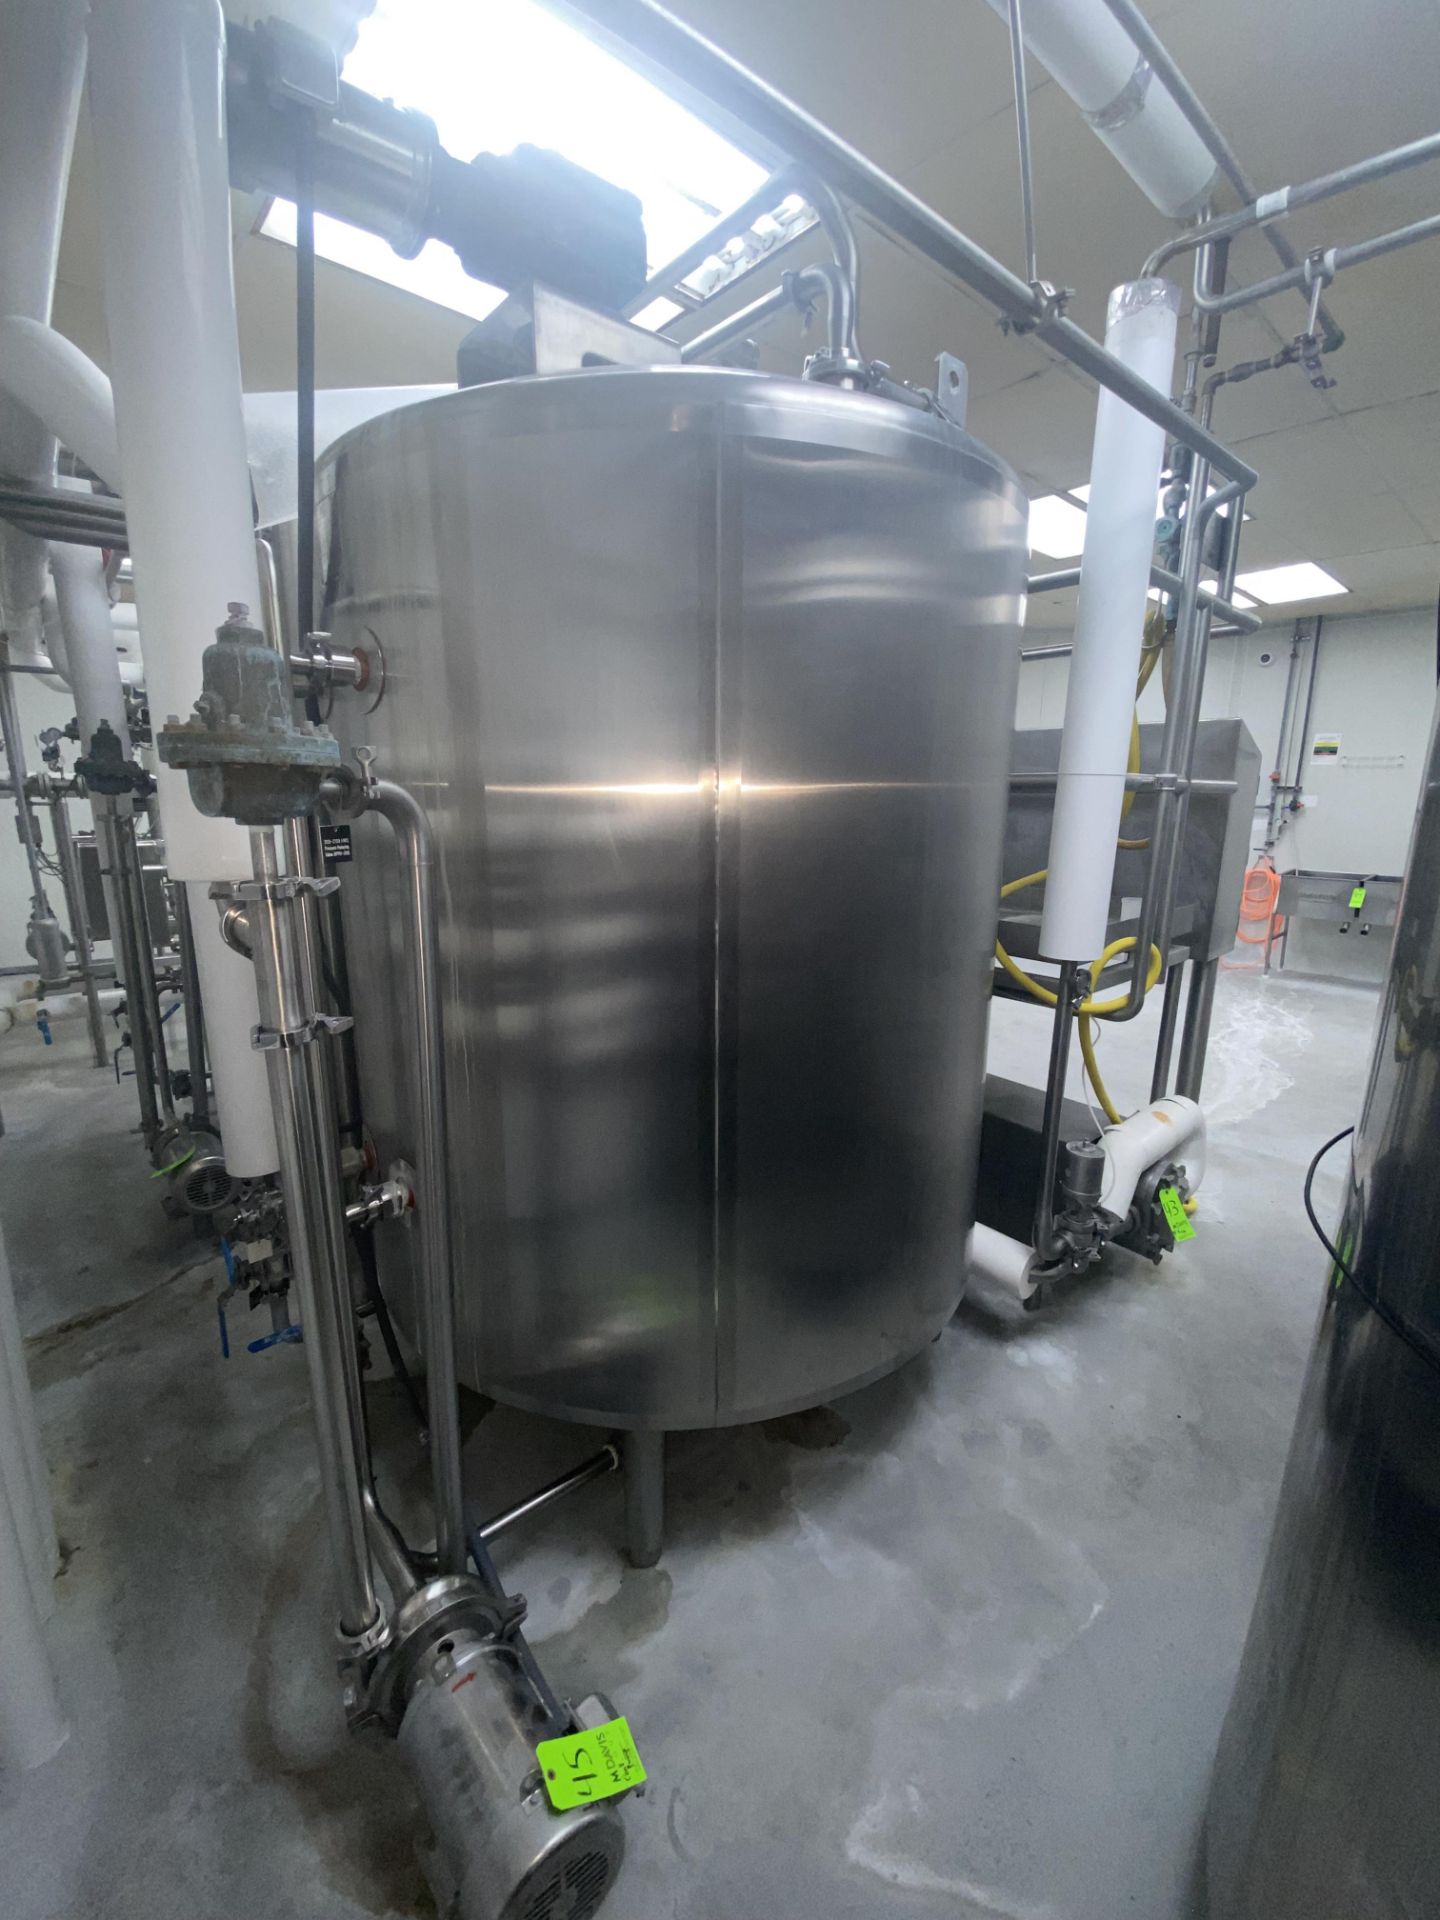 2013 Custom Fabricating Inc. 800 Gal. Legal Pasteurize, S/N 15517-001A, Material 316 L 304, Jacket - Image 4 of 9